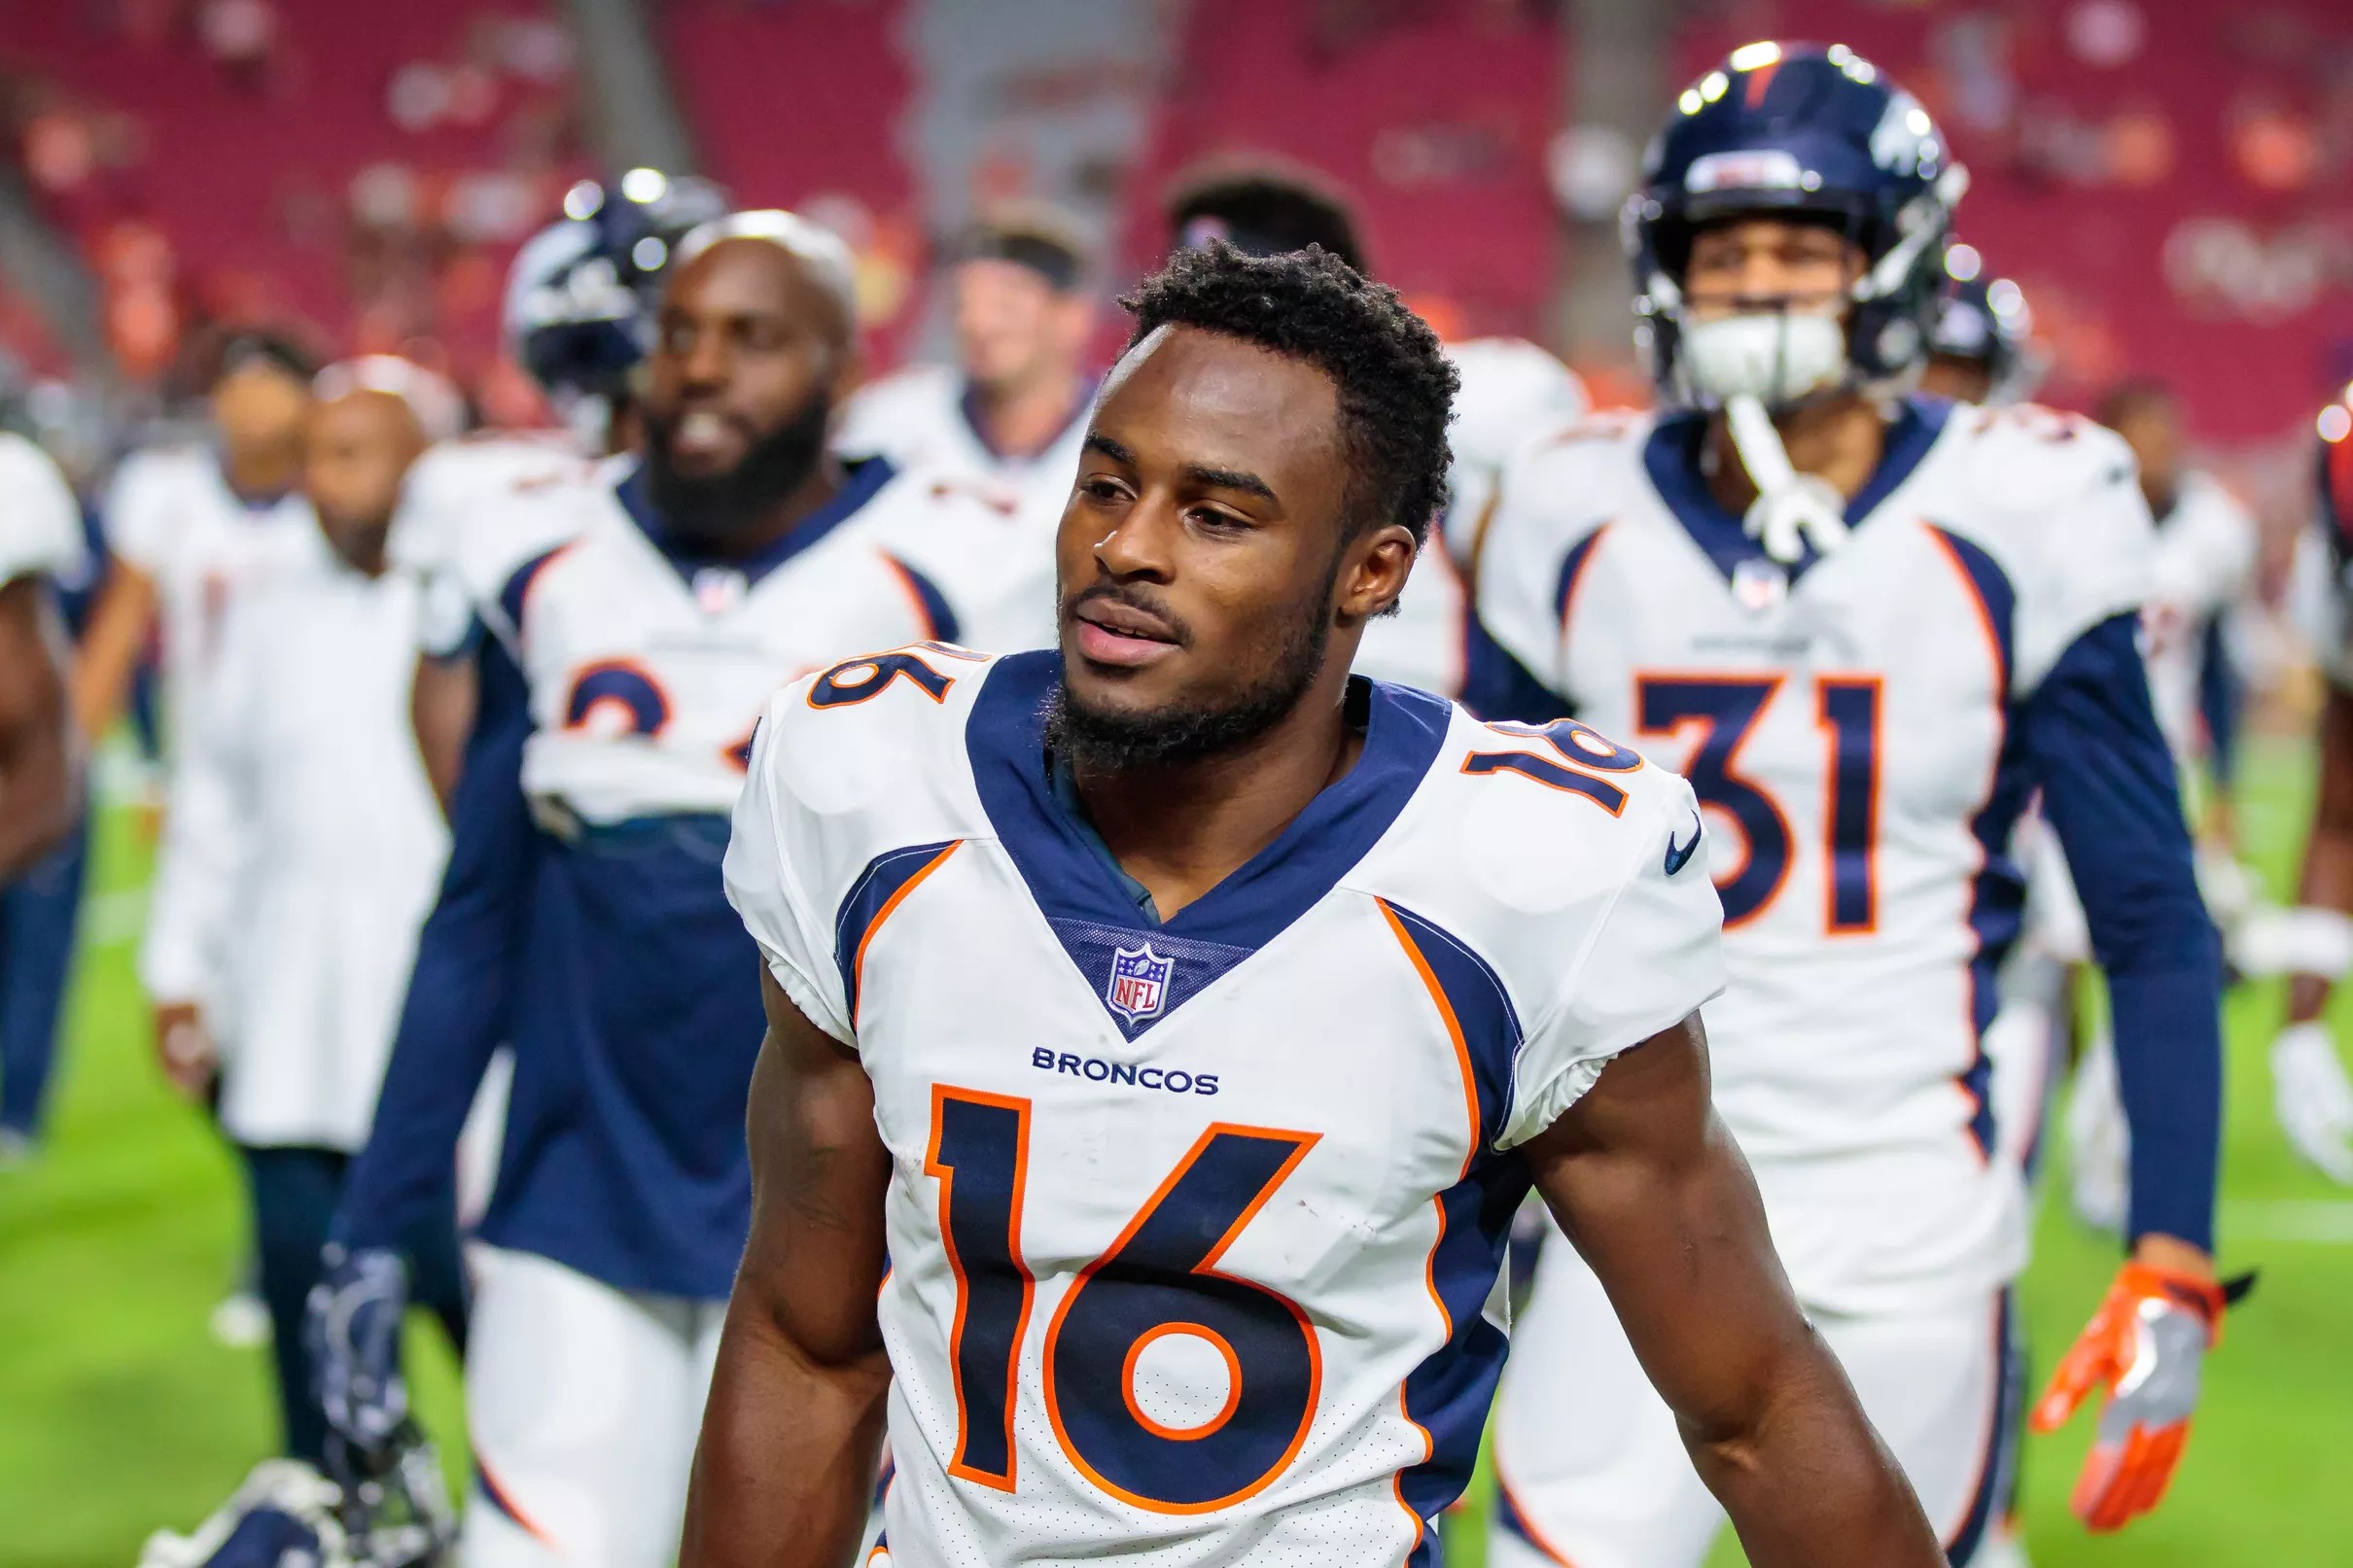 Broncos made several roster transactions on Monday